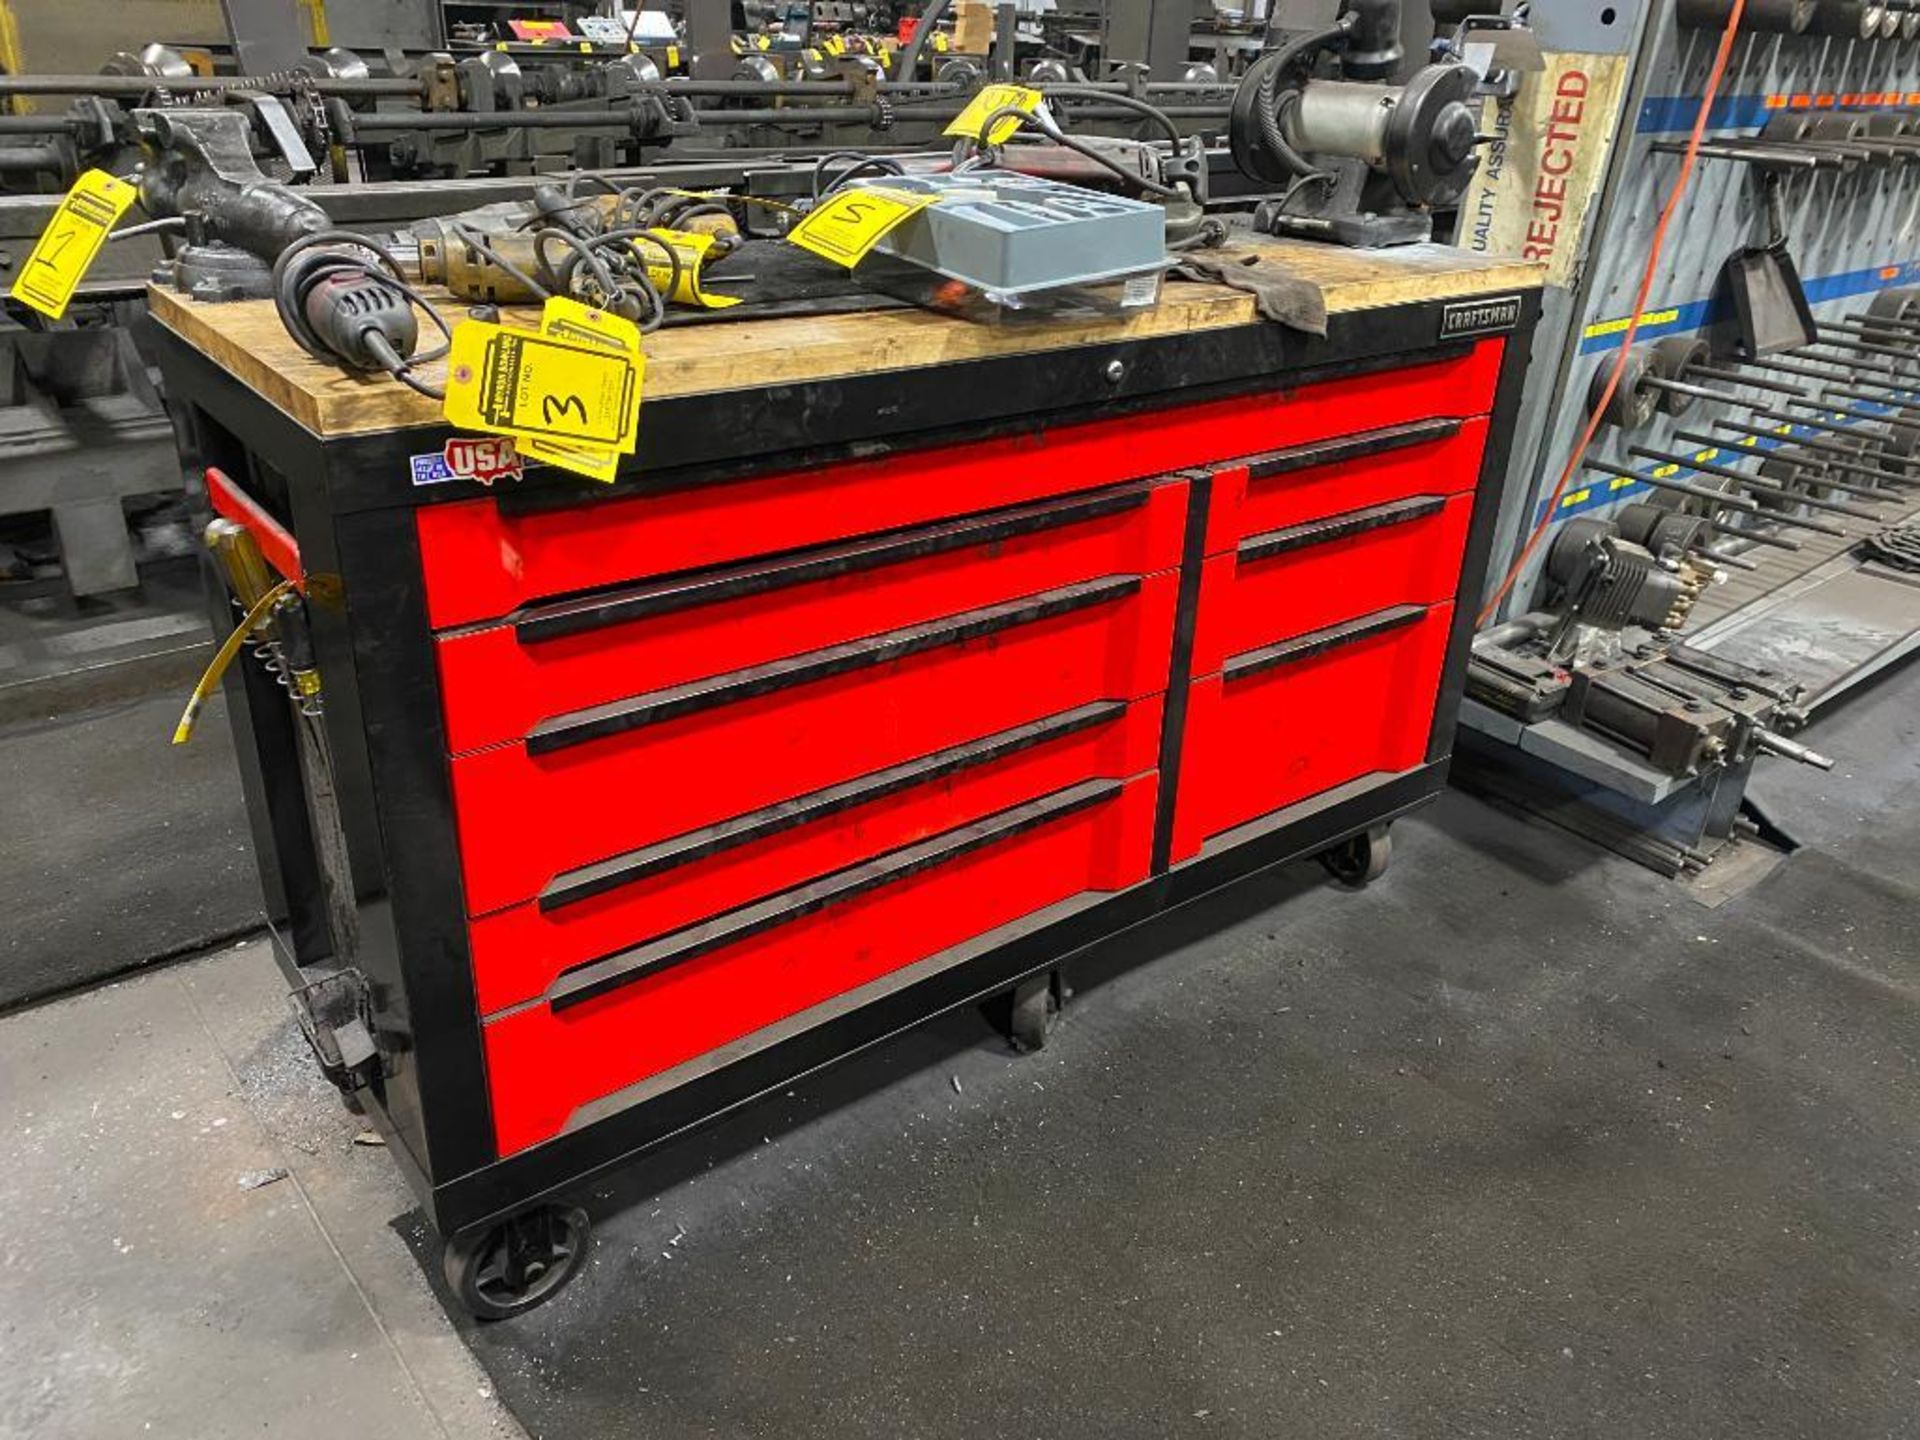 CRAFTSMAN TOOLBOX W/ BENCH GRINDER, WILTON VISE, COMBINATION WRENCHES, GREASE GUN, AIR HOSE, & SOCKE